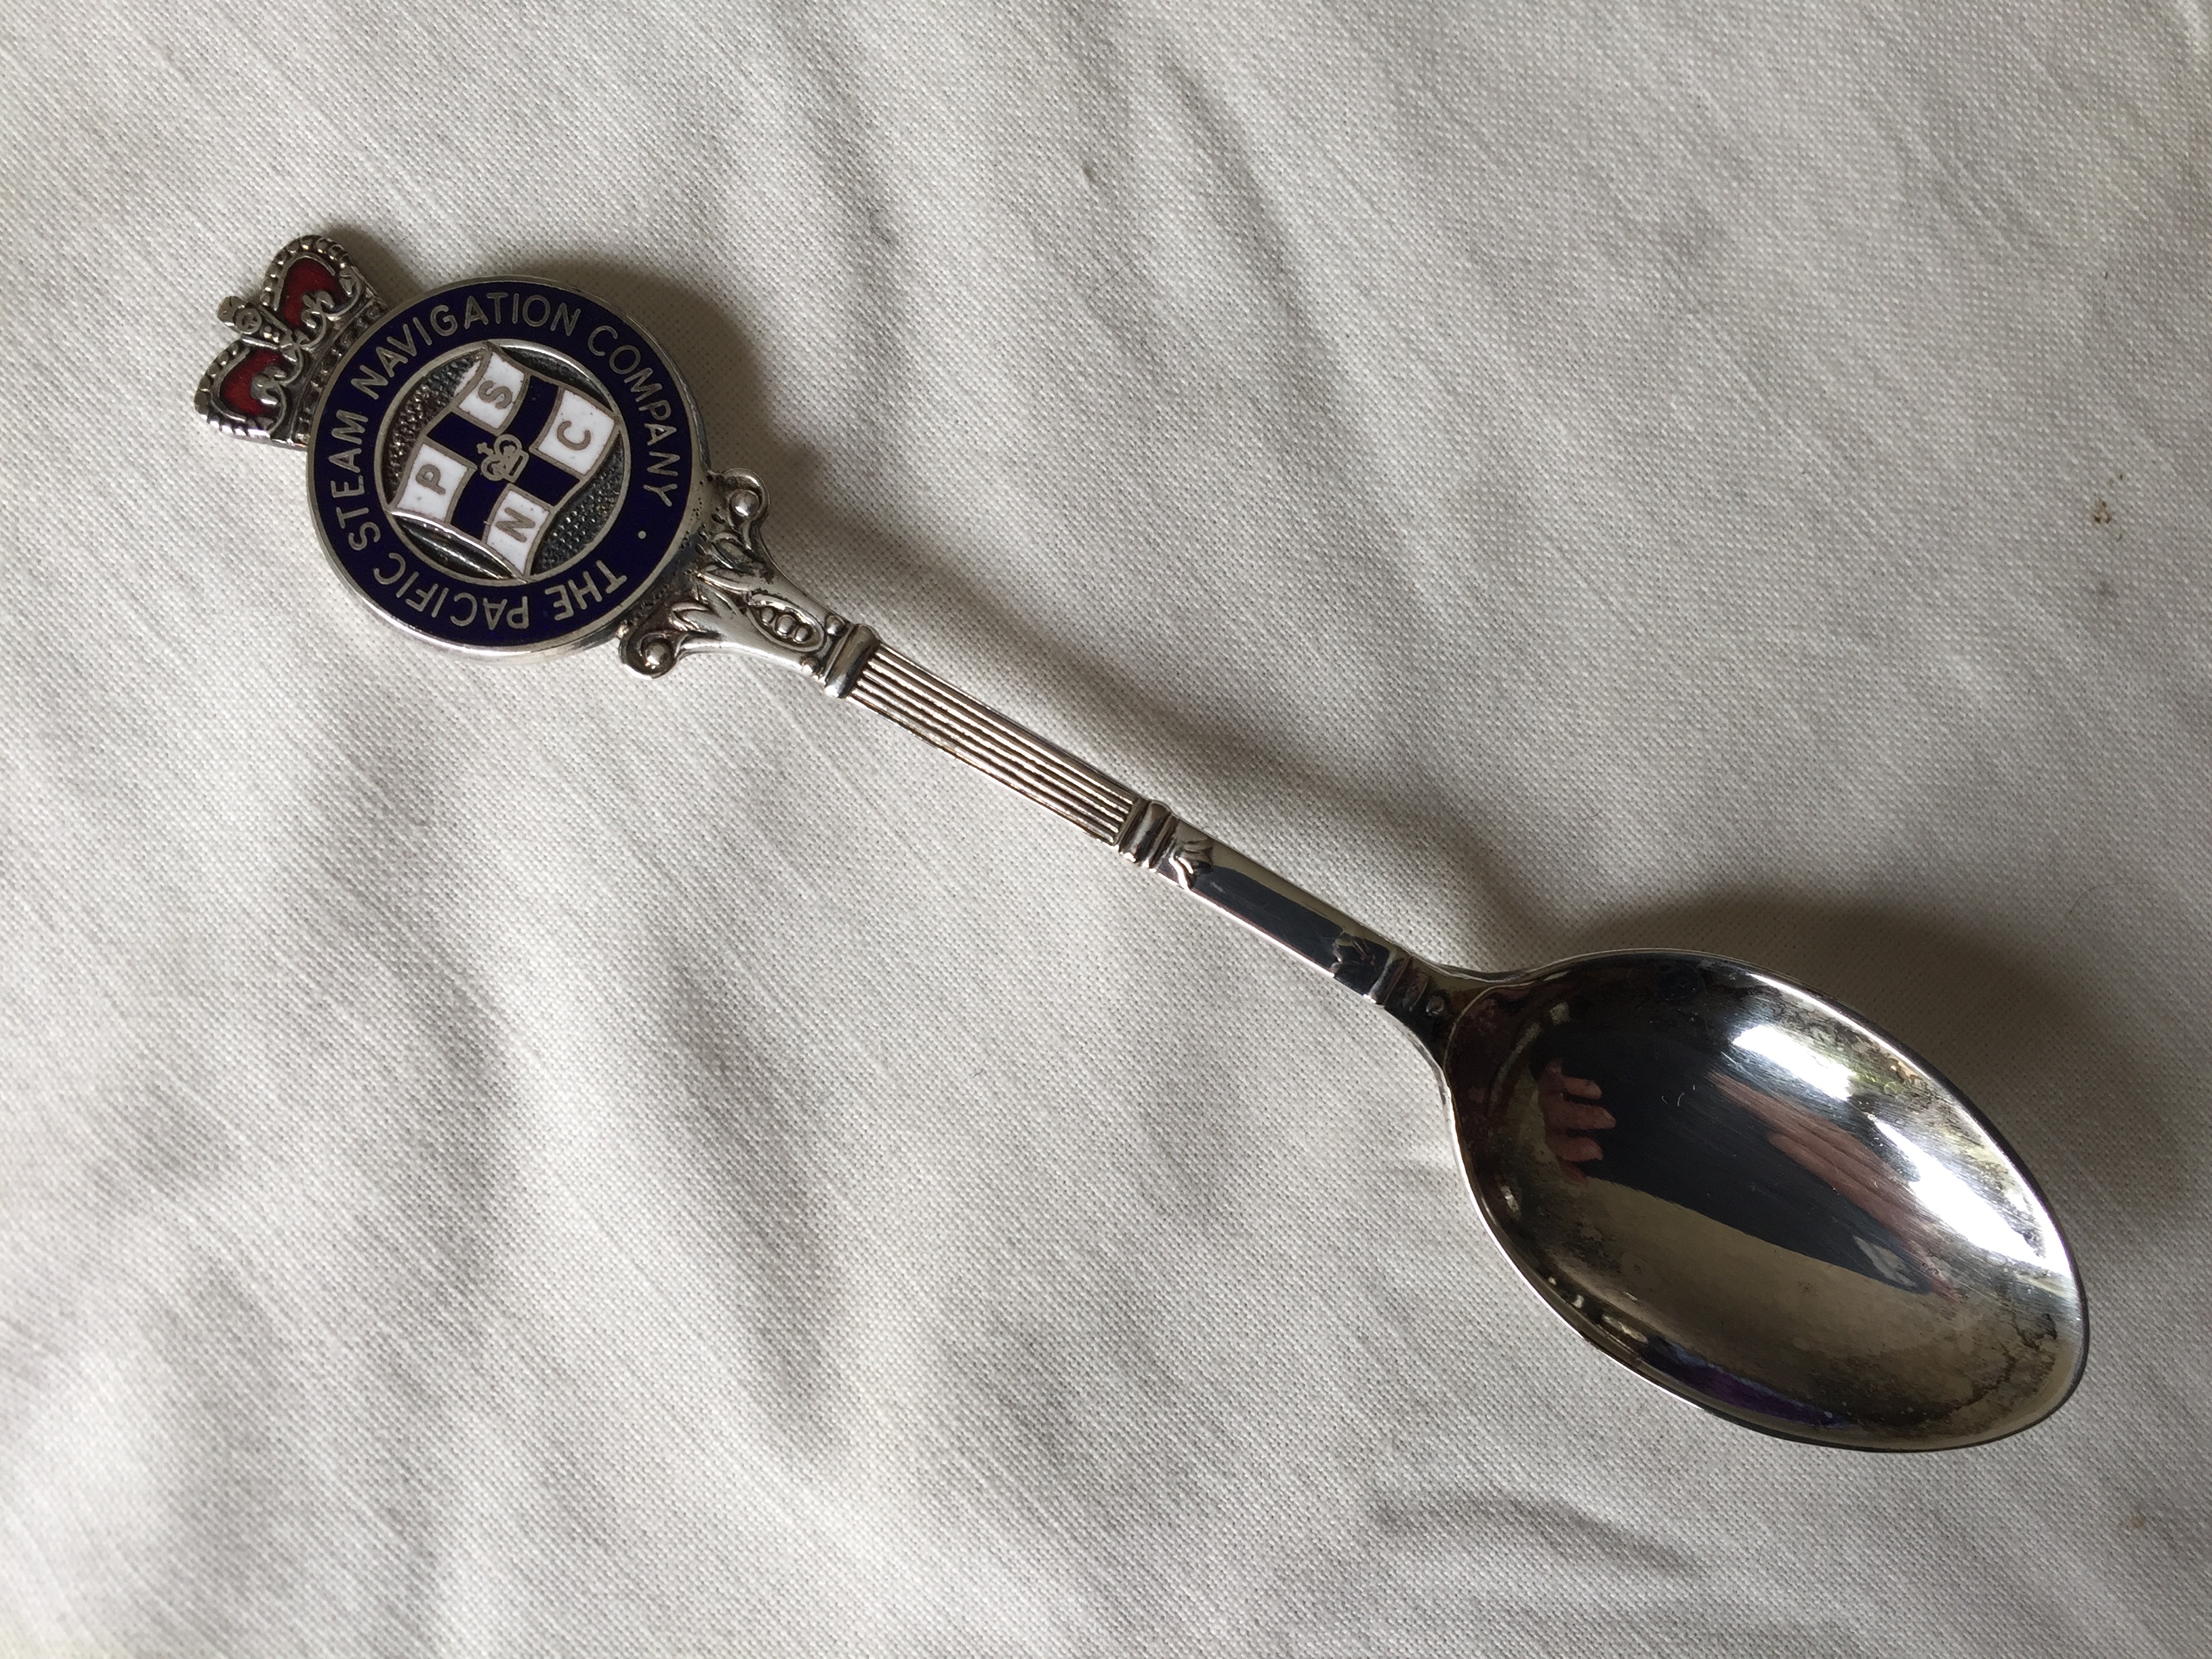 RARE SOUVENIR SPOON FROM THE PACIFIC STEAM NAVIGATION COMPANY